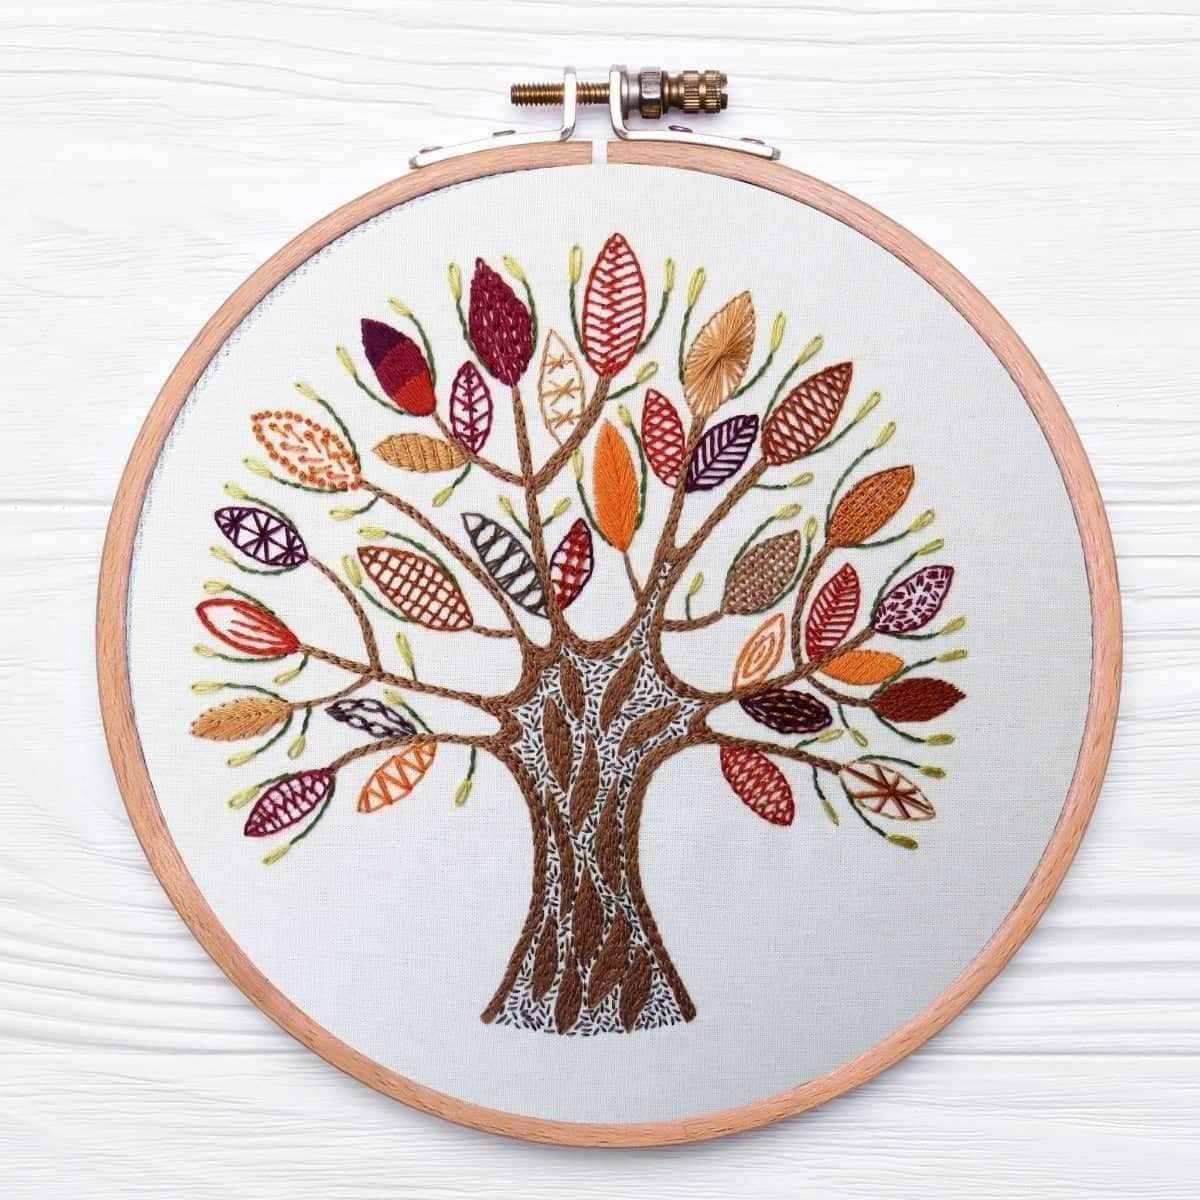 Stitch Fun with Leaves Hand Embroidery Pattern , PDF Download , StitchDoodles , Embroidery, embroidery hoop, embroidery hoop kit, Embroidery Kit, embroidery kit for adults, embroidery kit fro beginners, embroidery kits for beginners, embroidery pattern, hand embroidery, hand embroidery fabric, hand embroidery seat frame, modern embroidery kits, nurge embroidery hoop, PDF pattern, Printed Pattern , StitchDoodles , shop.stitchdoodles.com